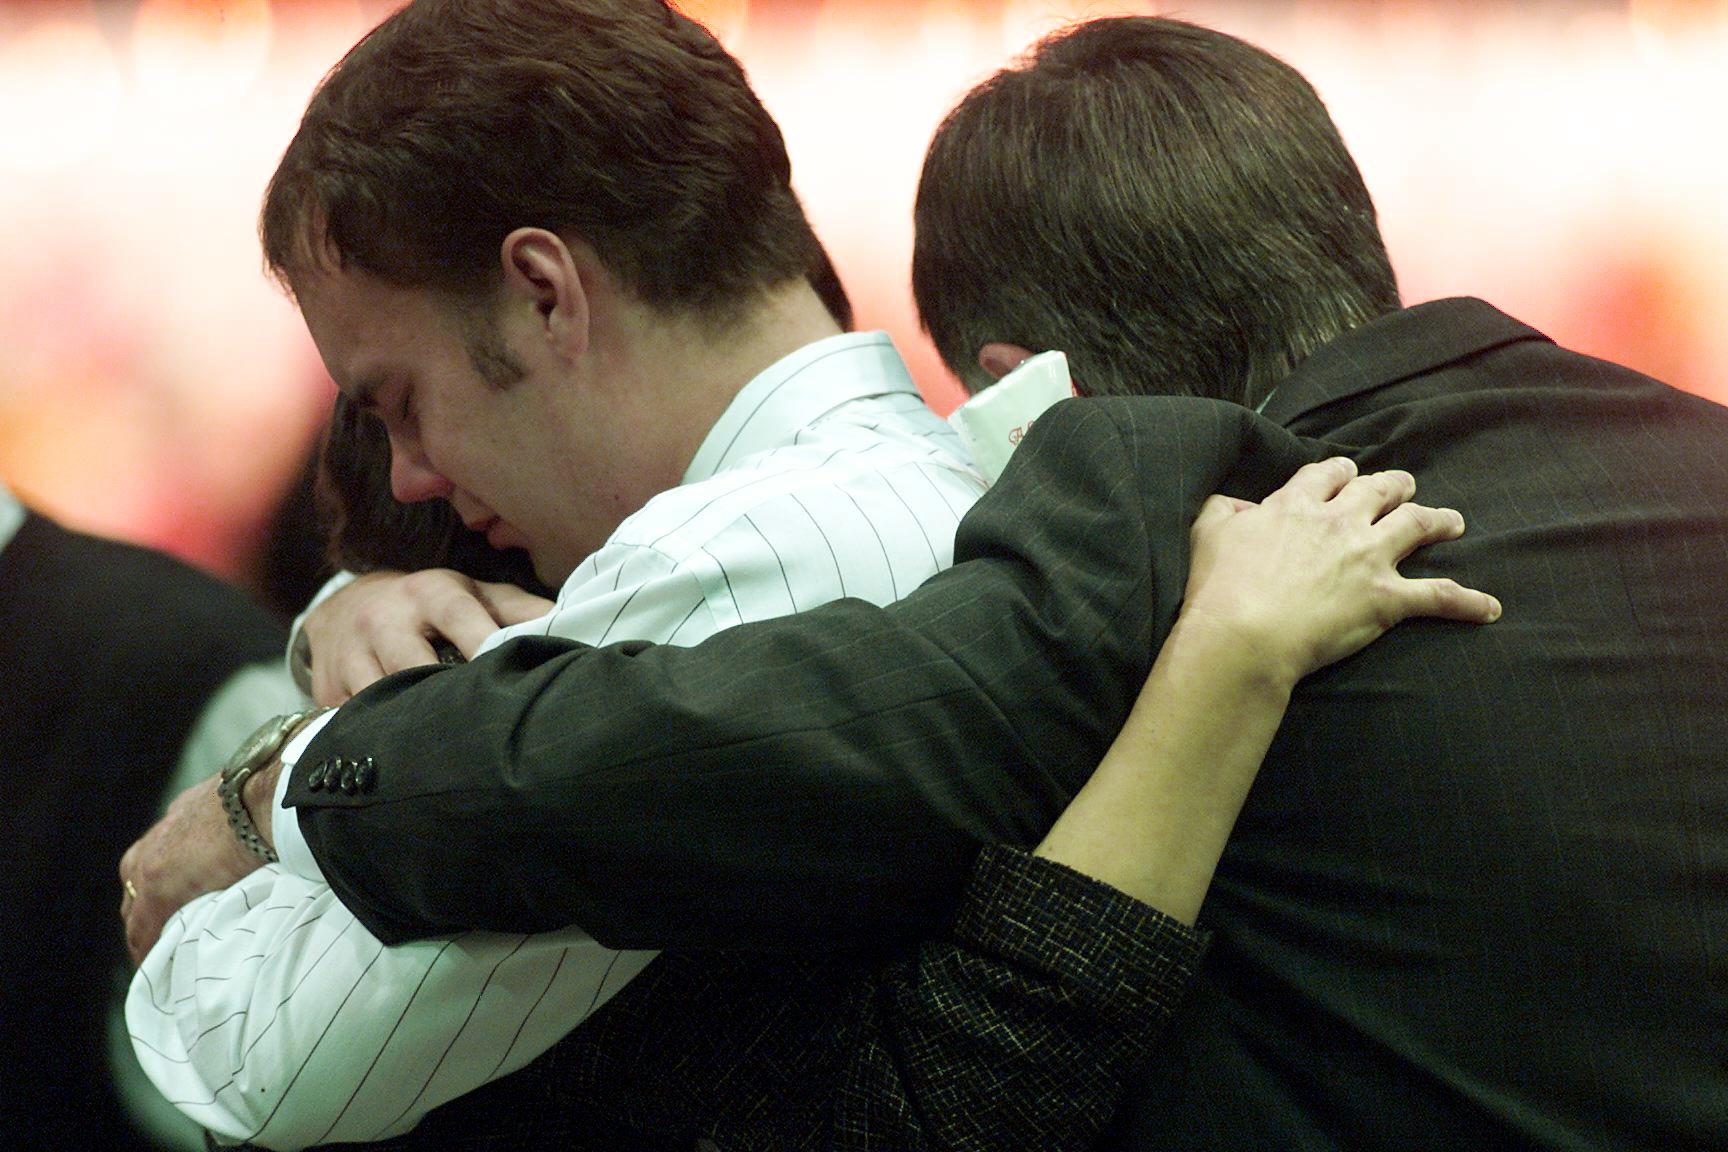 MALIBU, CA - FEBRUARY 5: The bereaved of victims from the Alaska Airlines flight 261 crash embrace one another during a memorial service at Pepperdine University 05 February, 2000 in Malibu, California, attended by hundred of relatives and friends of the 88 passengers and crew that died. Flight 261 crashed into the Pacific Ocean off the coast of California 31 January 2000 after experiencing a problem with its stabilizer. (ELECTRONIC IMAGE) (Photo credit should read BRYAN CHAN/AFP via Getty Images)